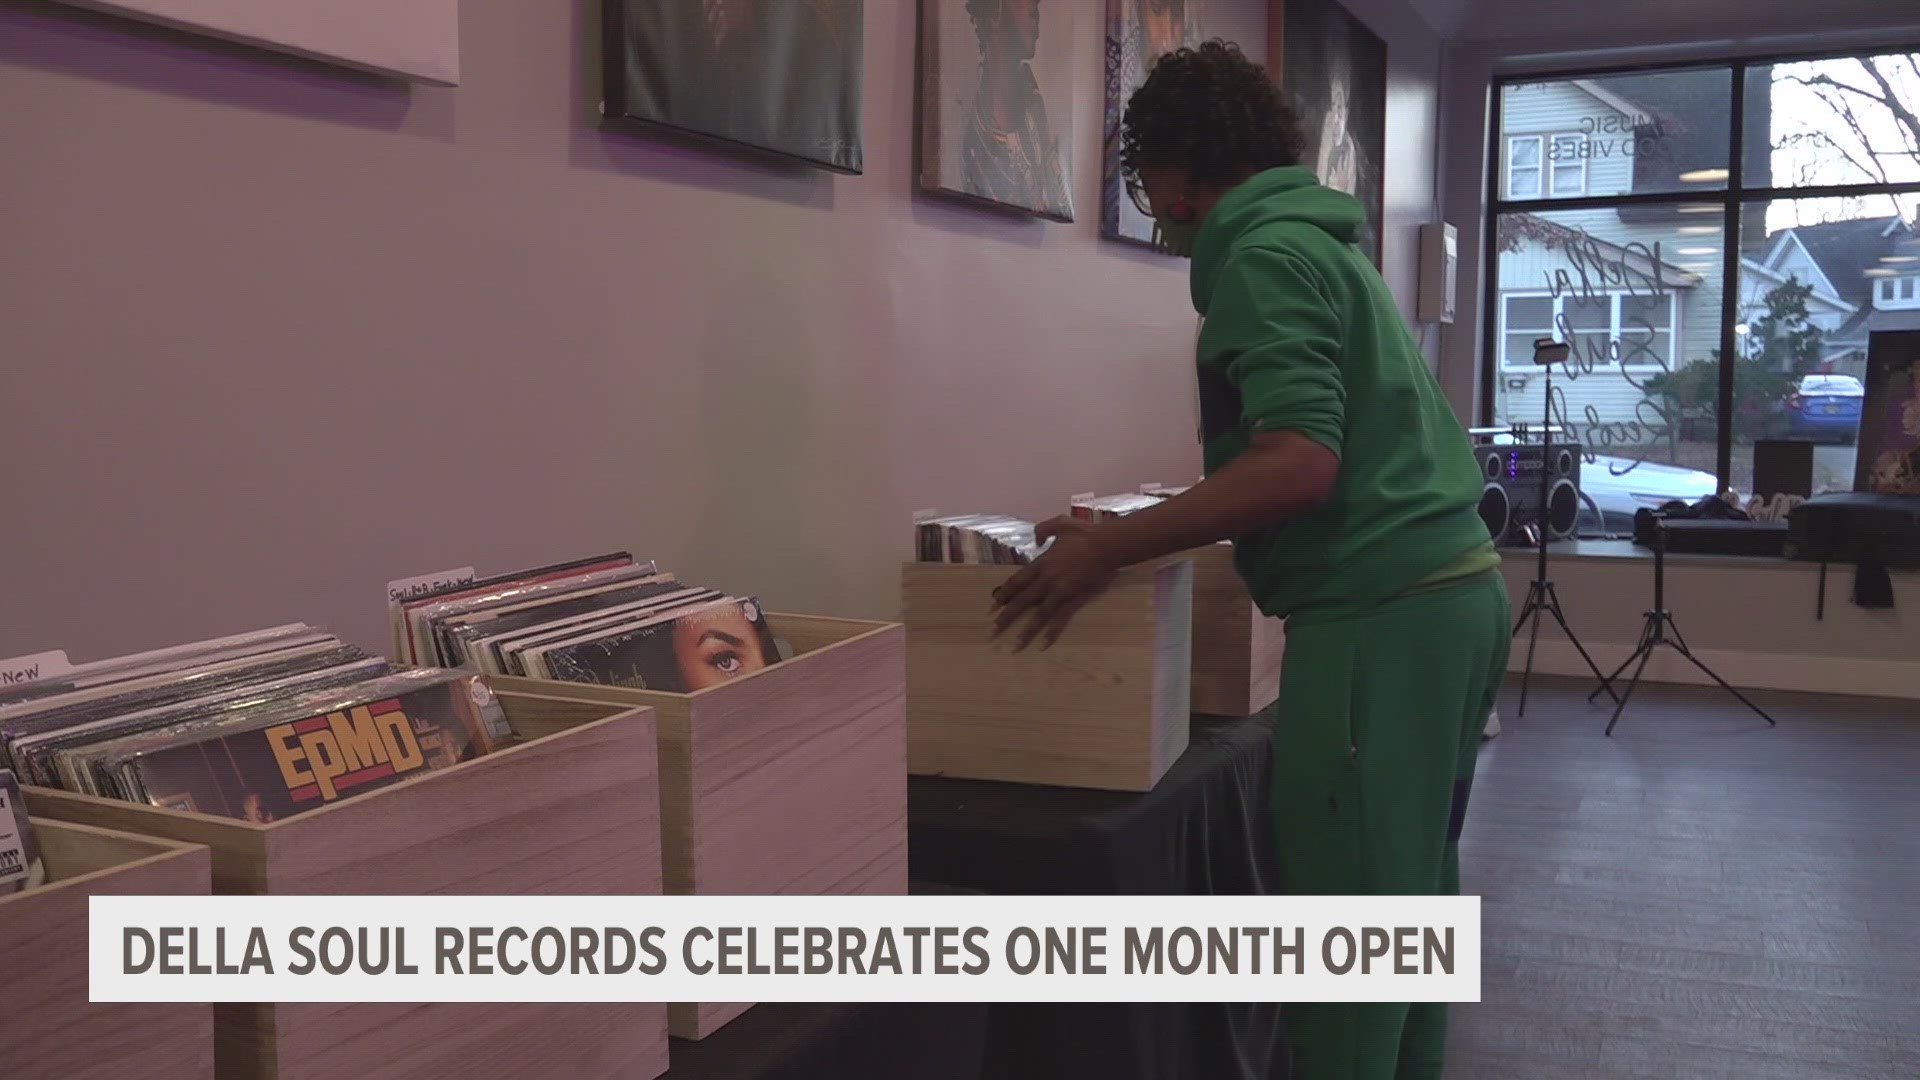 Della Soul Records just celebrated one month of being open for business and they're doing well heading into the holiday shopping season.